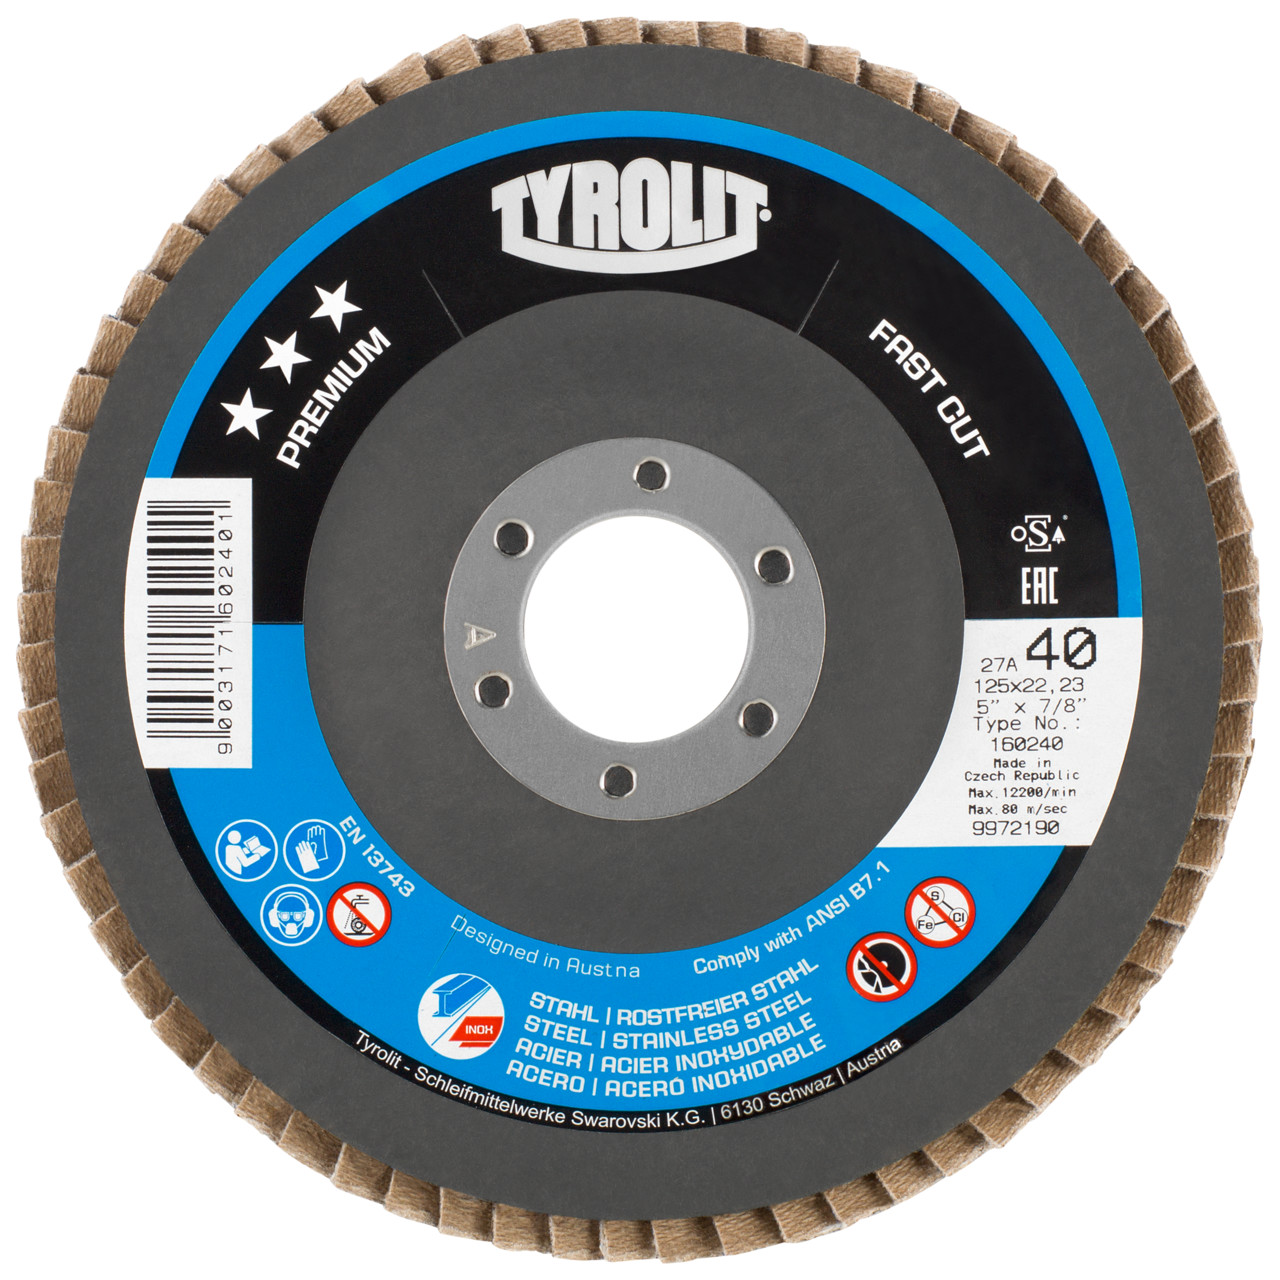 Tyrolit Serrated lock washer DxH 115x22.2 FASTCUT for steel &amp; stainless steel, P80, shape: 27A - cranked version (glass fibre carrier body version), Art. 160235